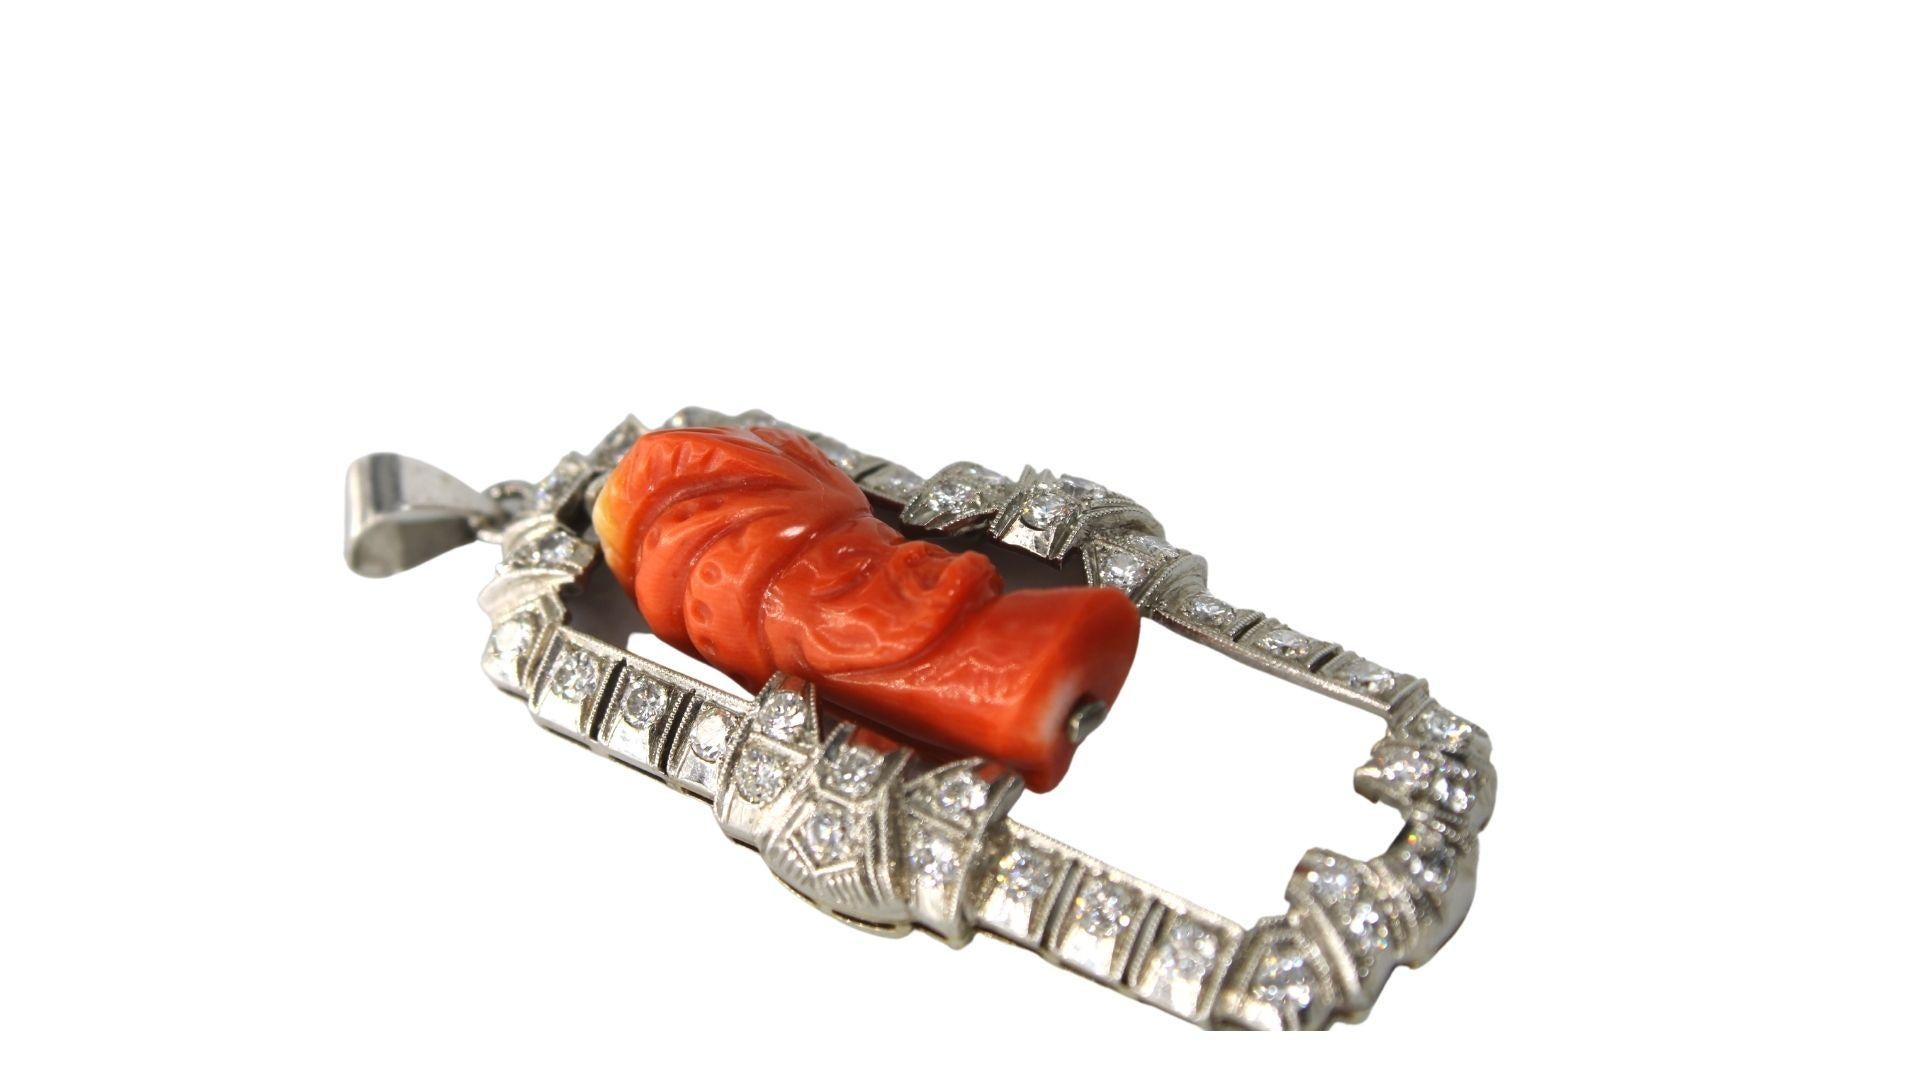 this Outstanding piece feturing a fabulous and very artistic Vintage coral pendant from the 1970's! This striking figural piece is set in vibrant 14kt white gold and 3.60ct of diamonds. This pedant is made of hand carved coral. The pendant is likely